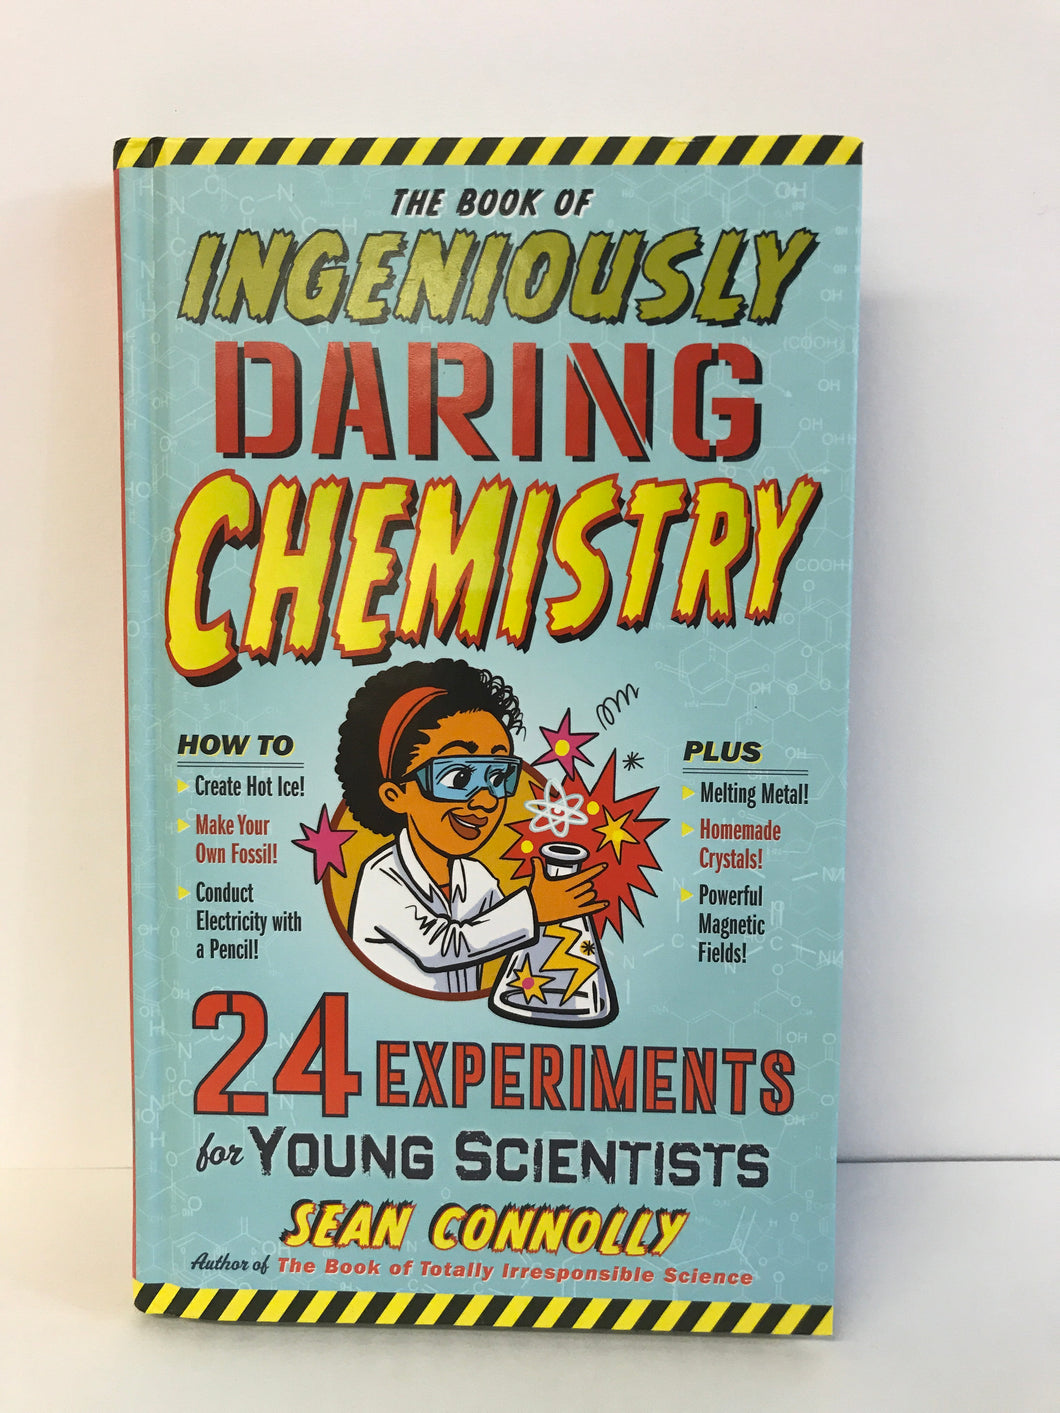 The Book of Ingeniously Daring Chemistry- 24 experiments